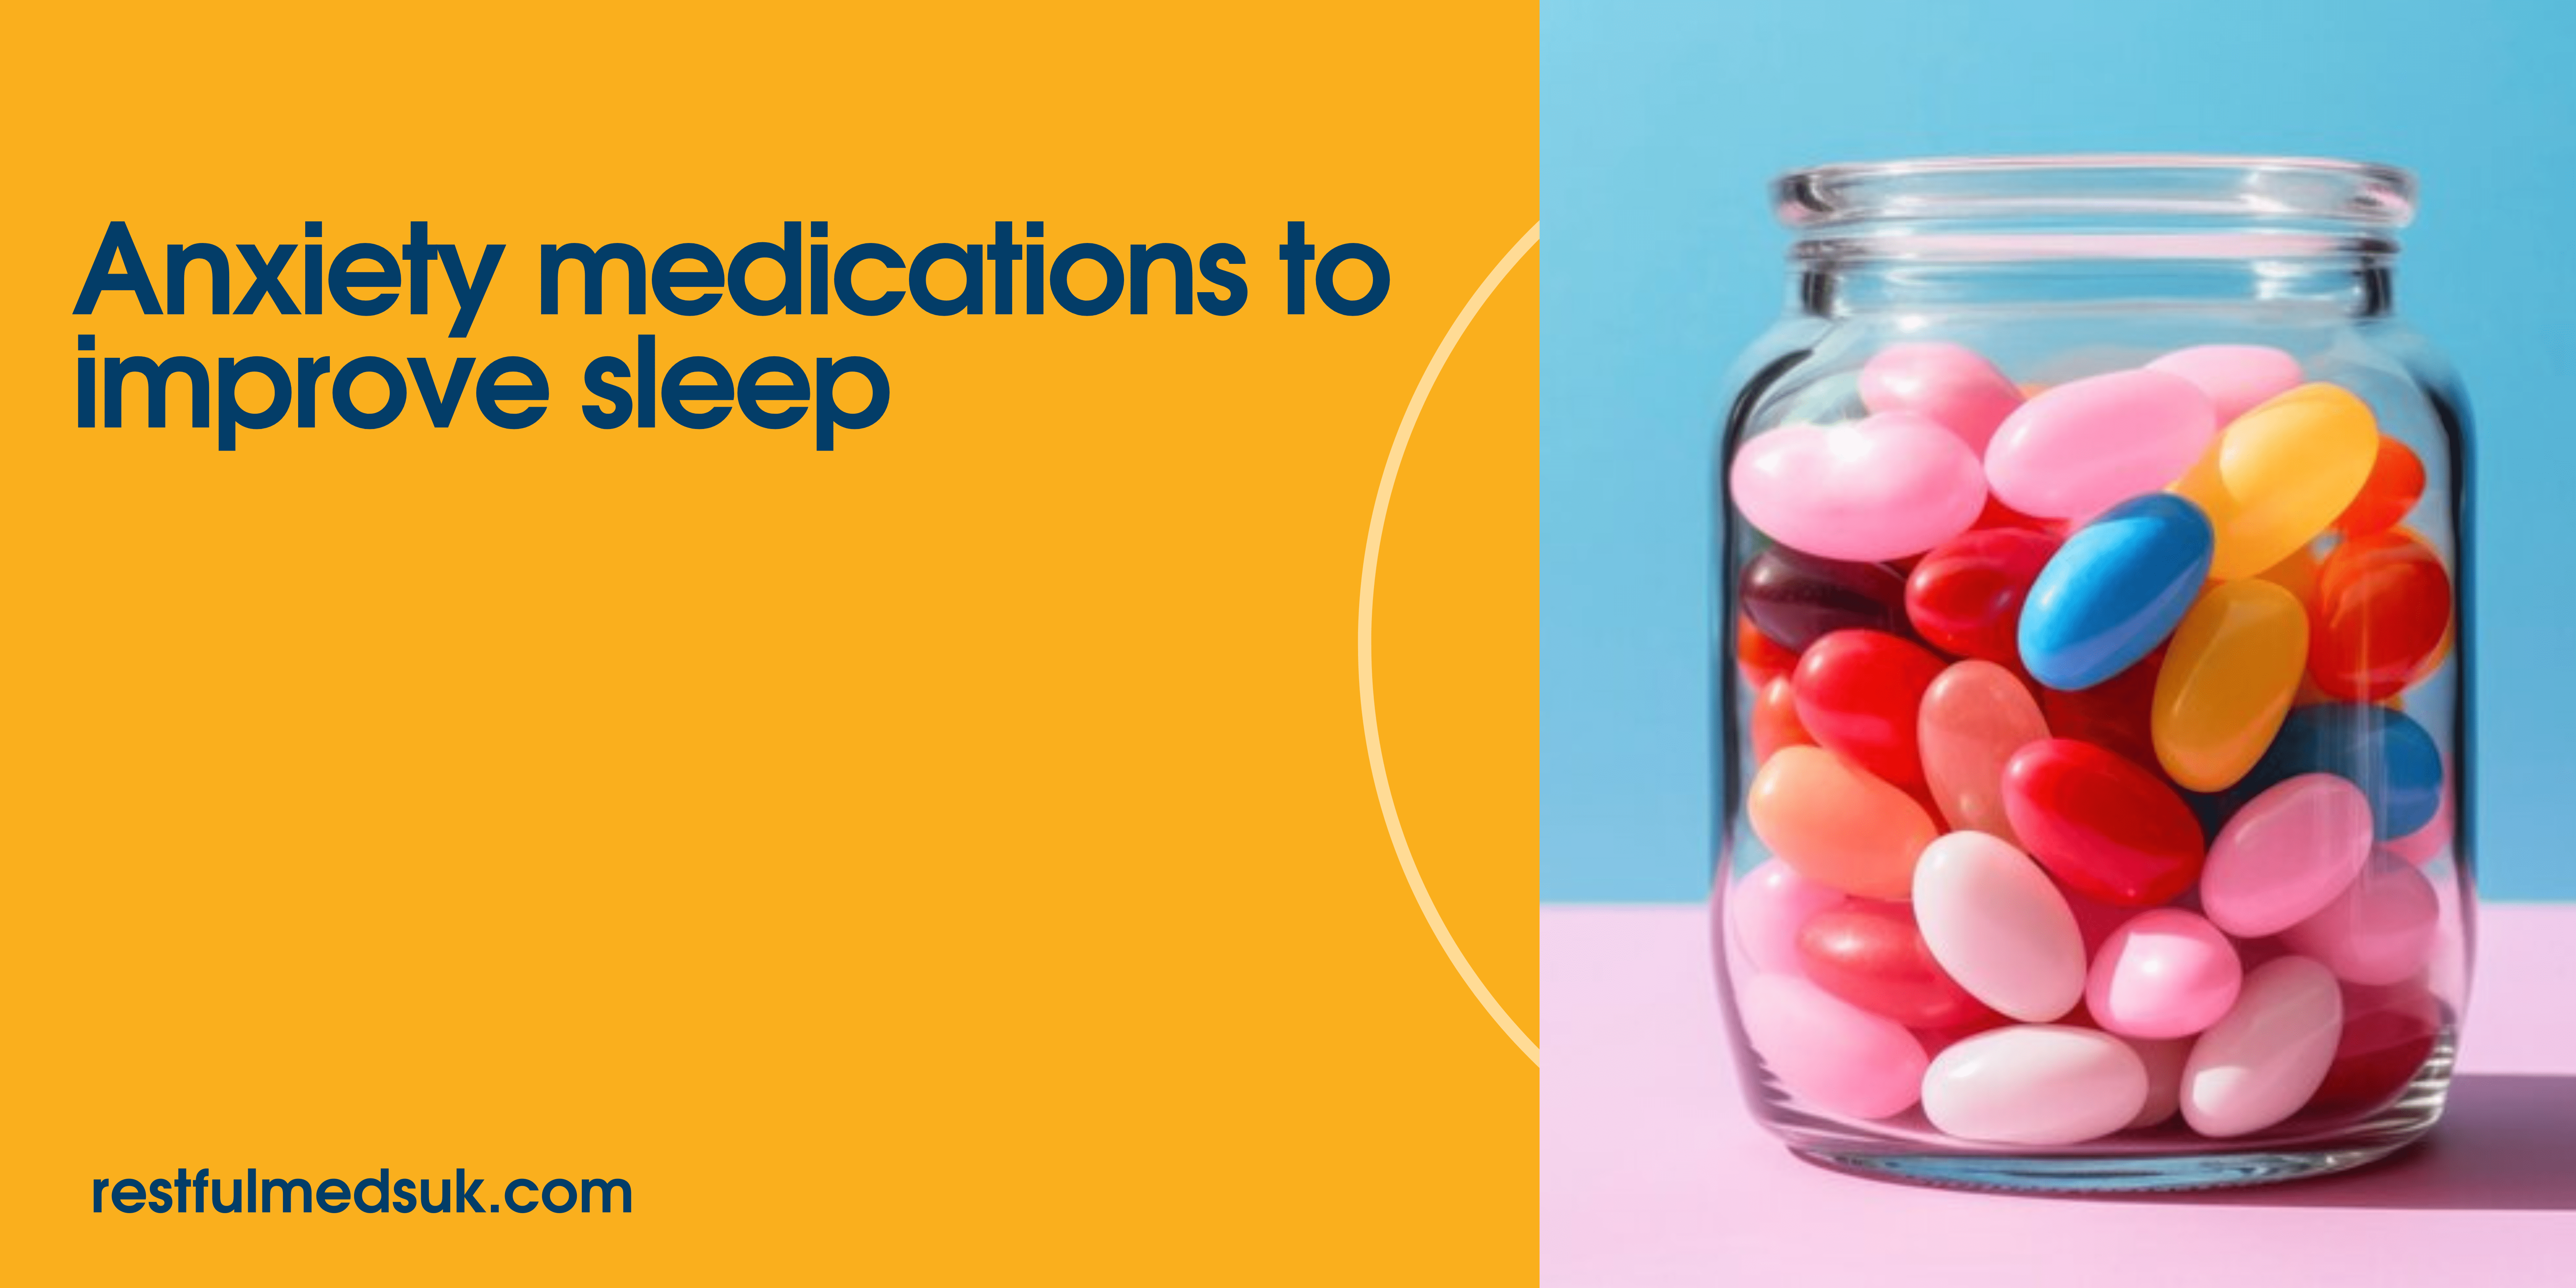 Can I take anxiety medications to improve sleep quality?